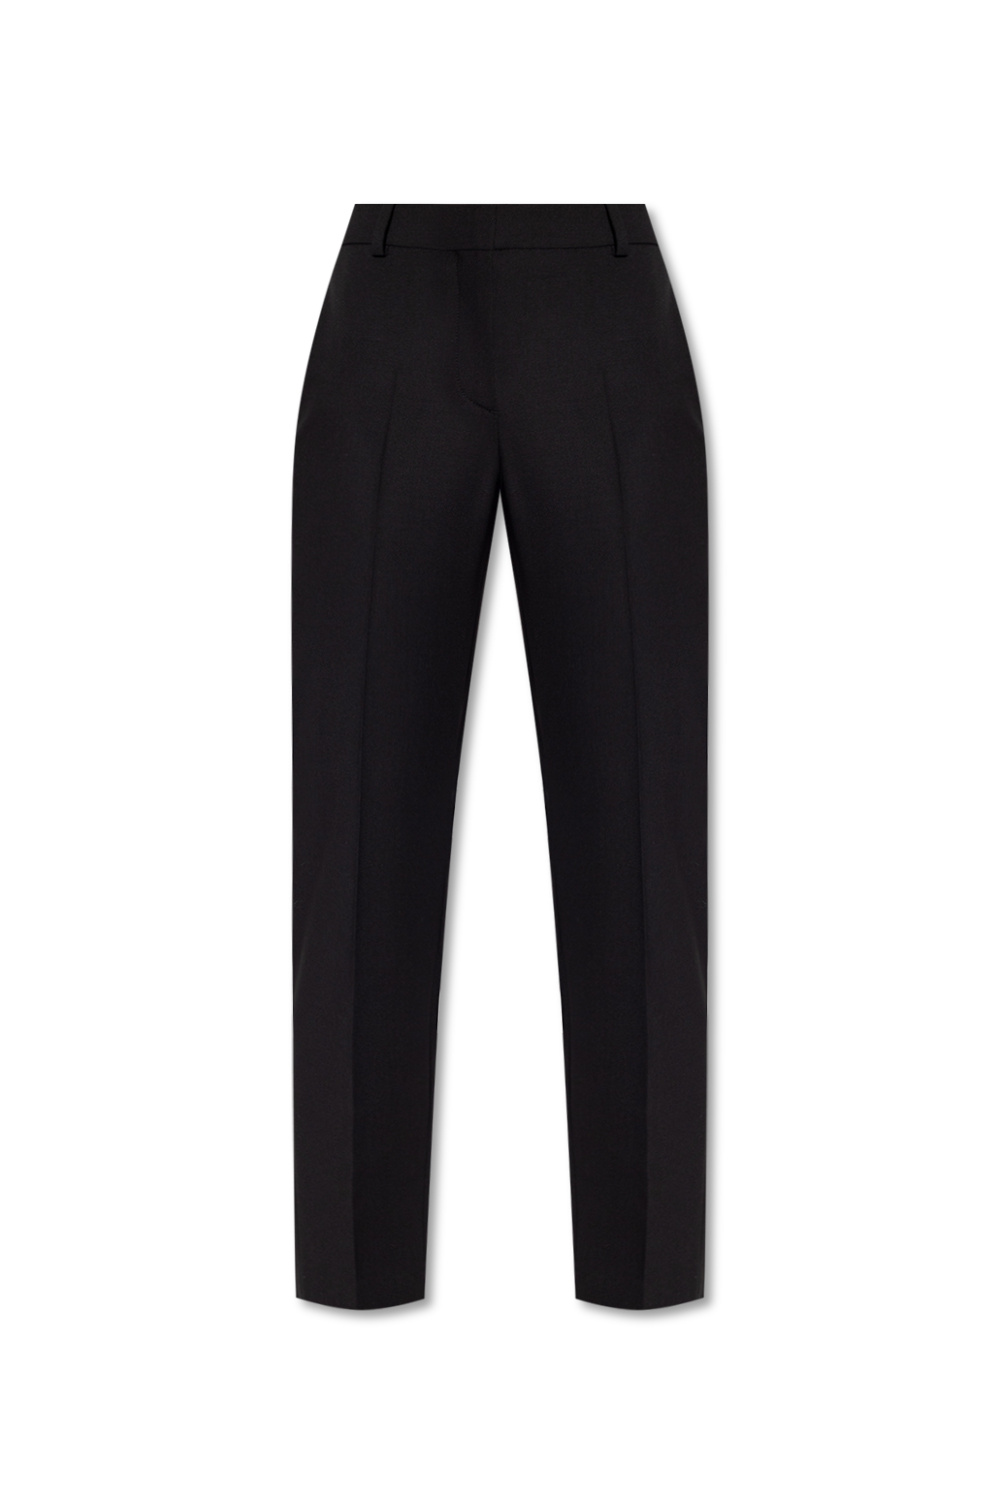 PS Paul Smith Pleat-front trousers | Women's Clothing | Vitkac